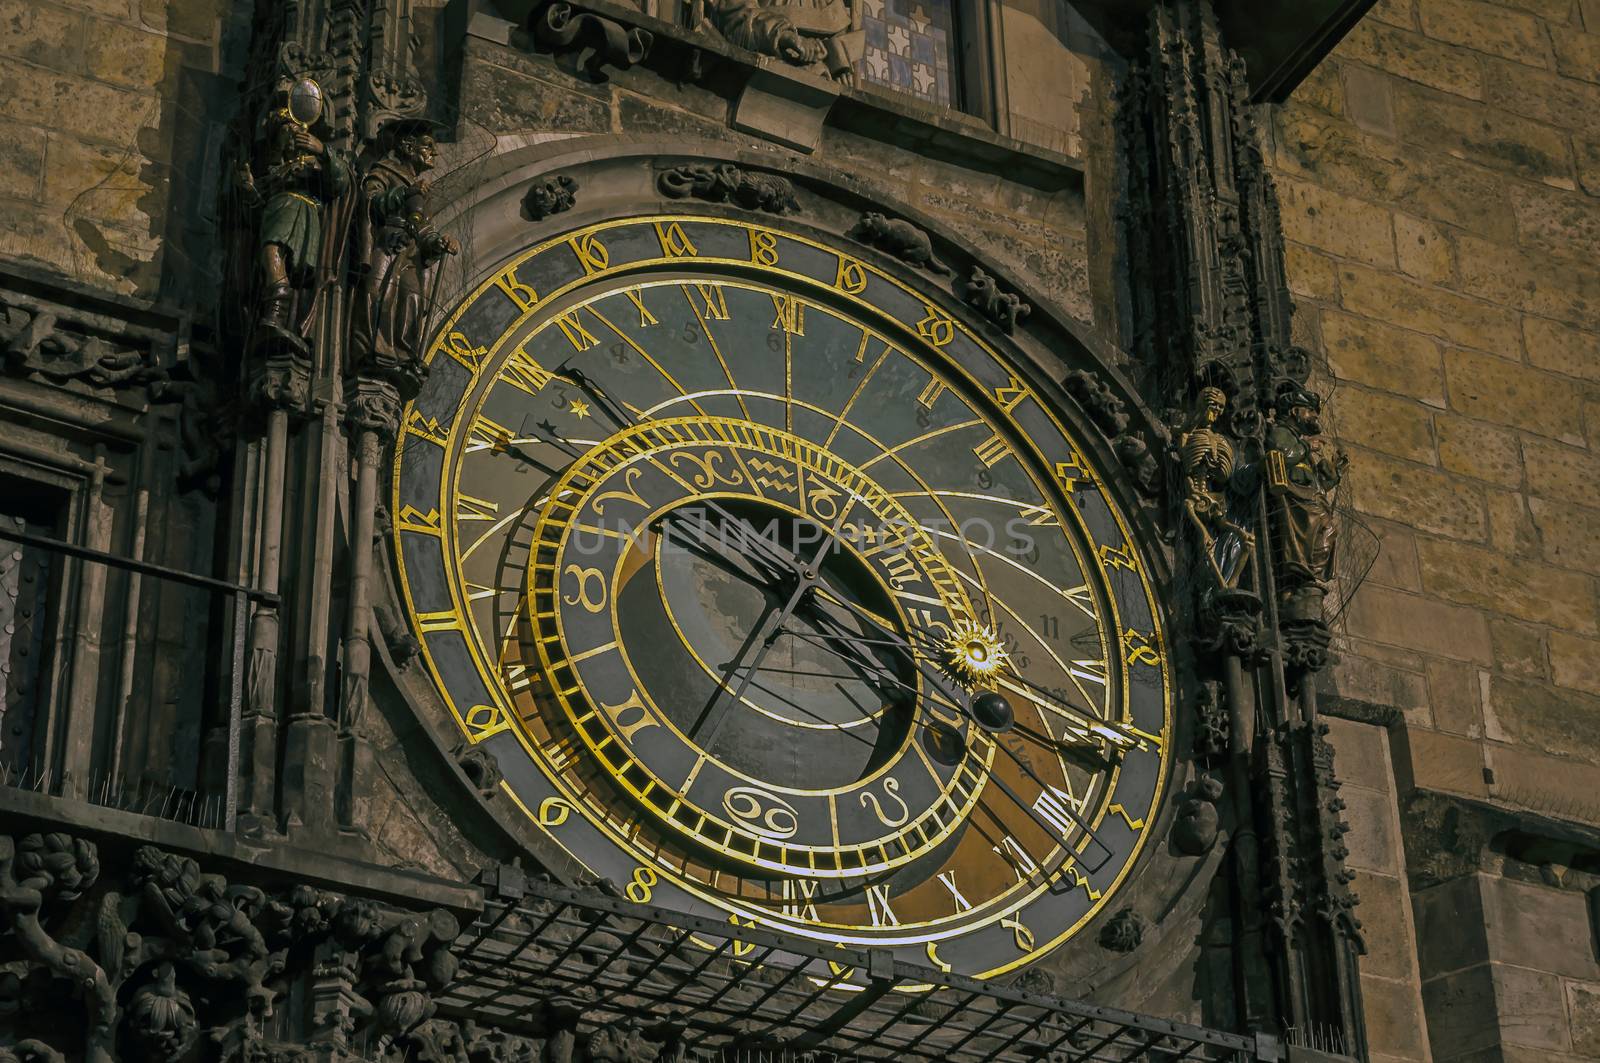 Close up view of the astronomical clock of Prague at night, Czech Republic.